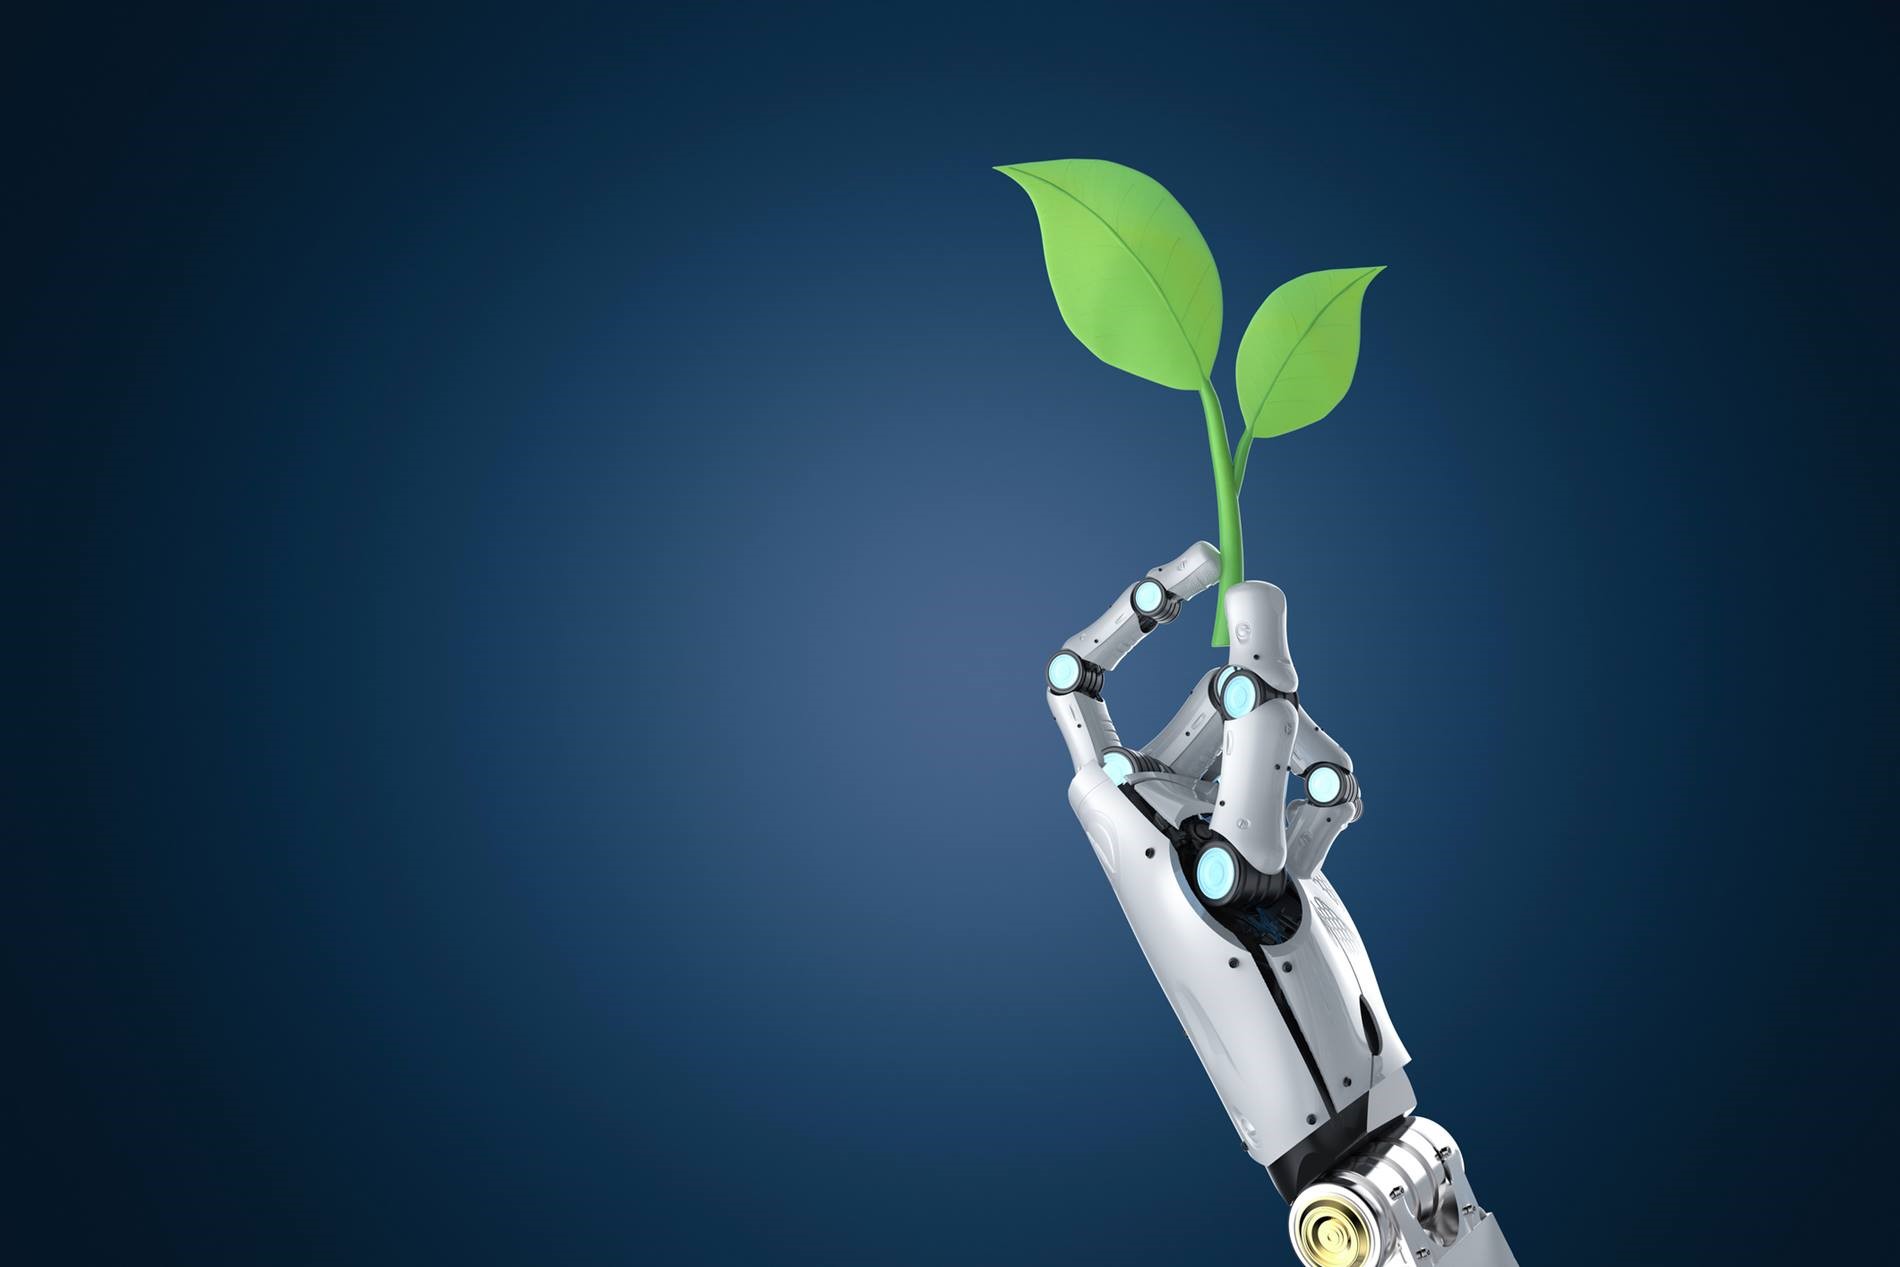 Can a robot be sustainable?